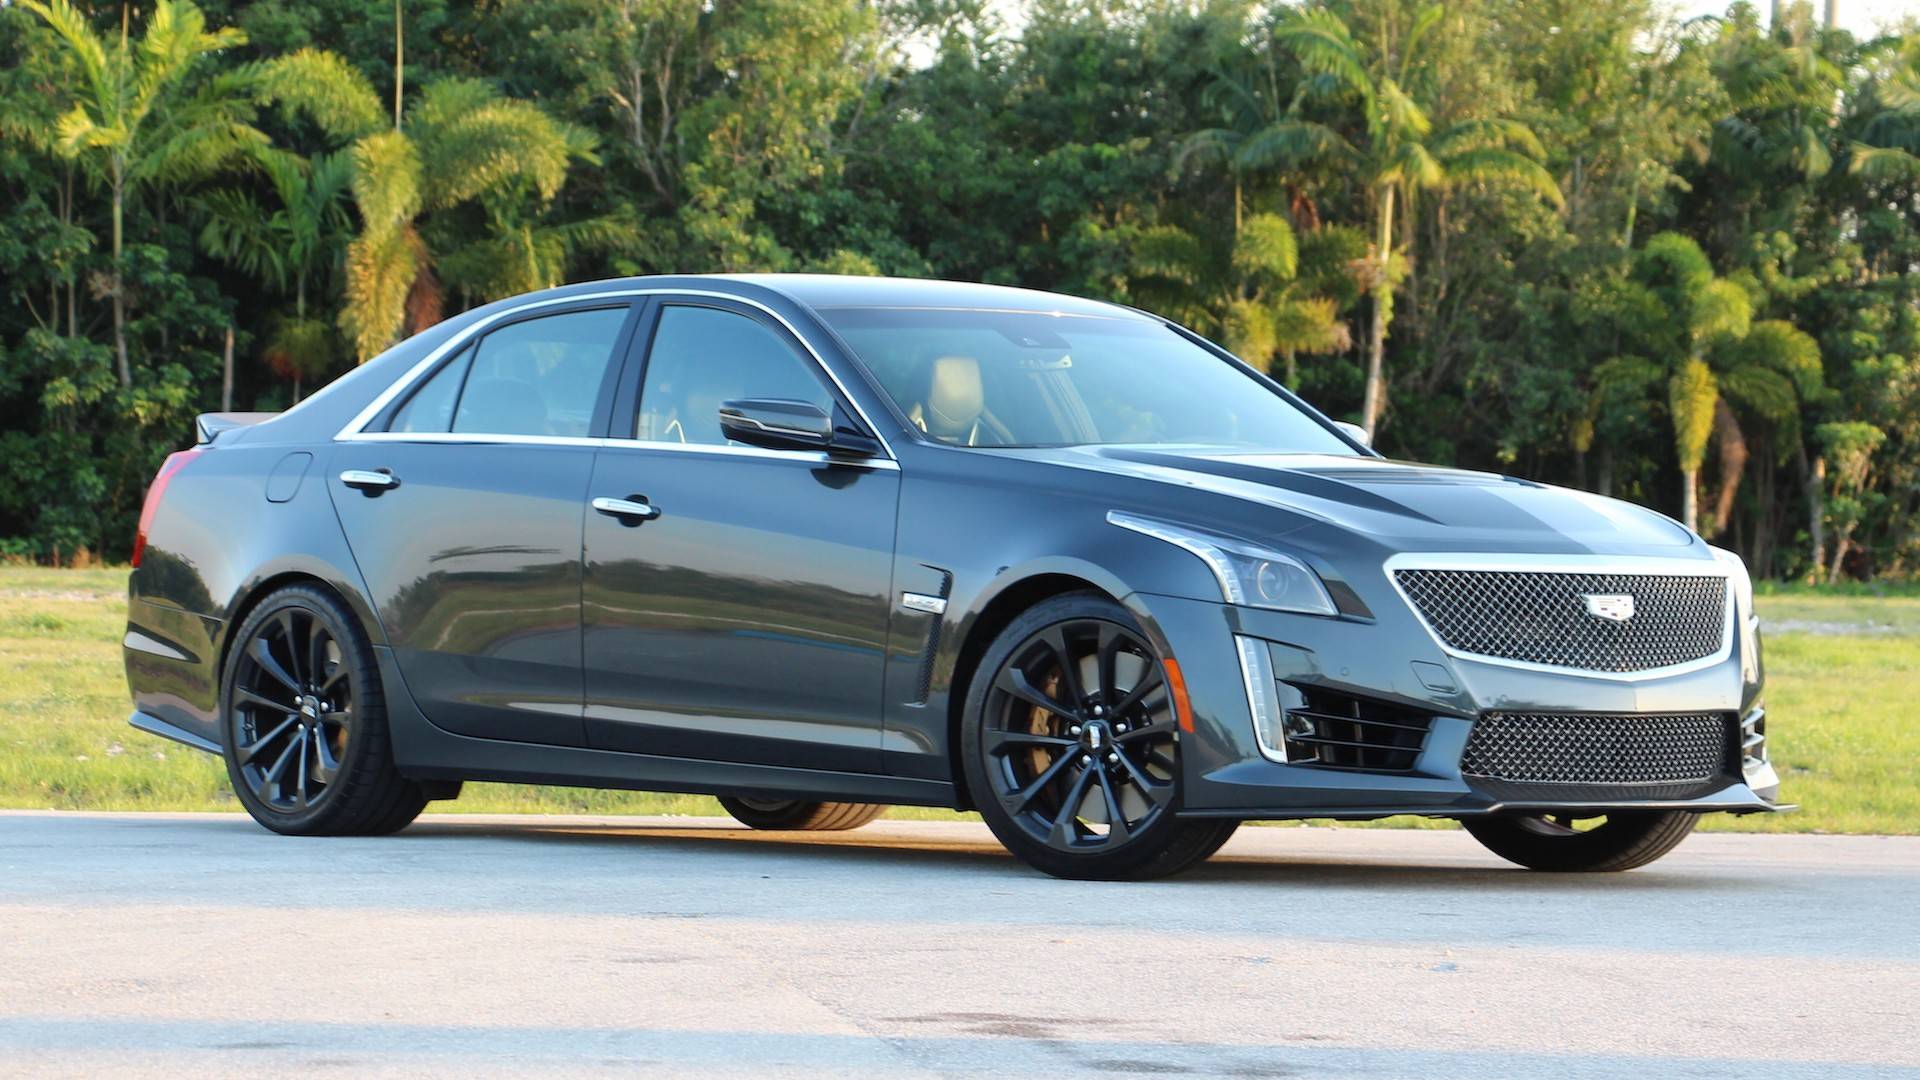 2018 Cadillac CTS-V Review: Fast And Furious, Yet Unrefined